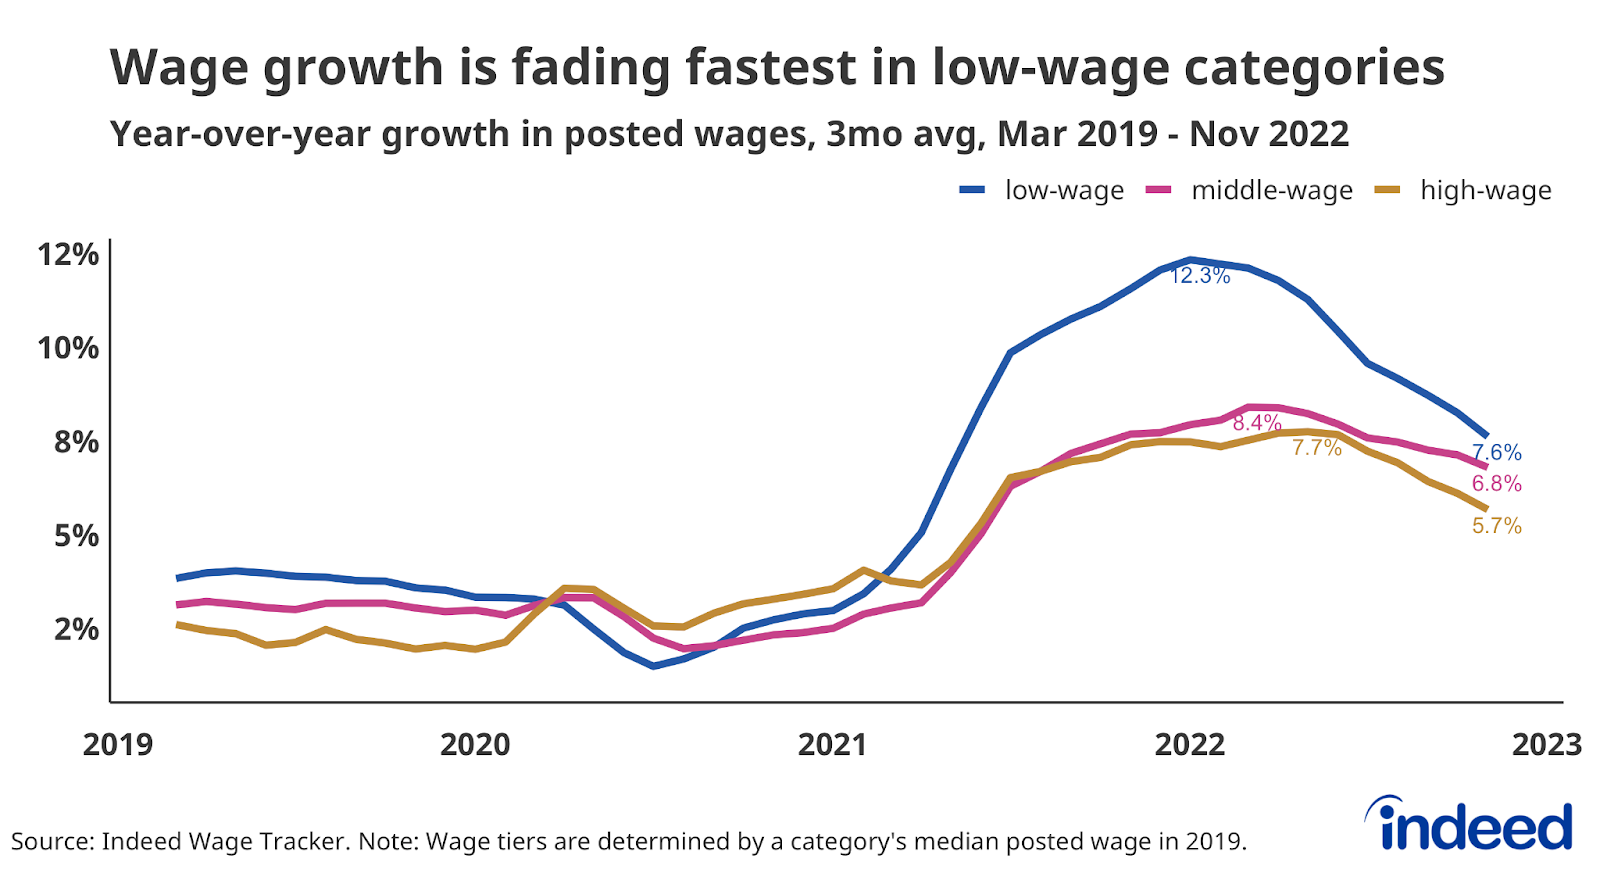 Line graph titled “Wage growth is fading fastest in low-wage categories” with a vertical axis from 2% to 12%.